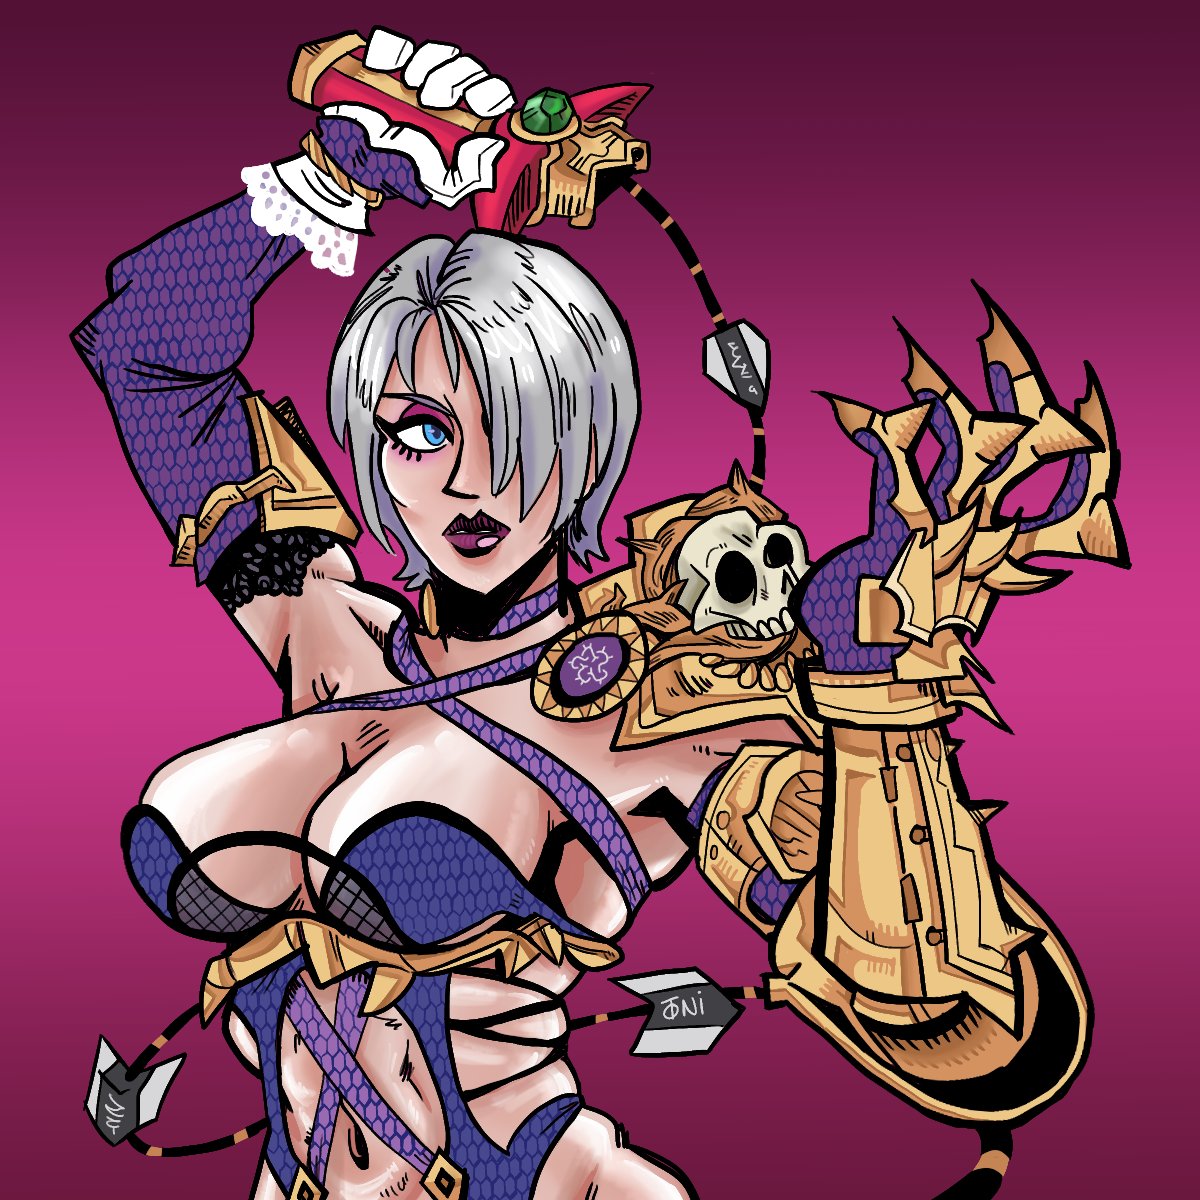 Drew Ivy Valentine from Soul Calibur for a friend !!